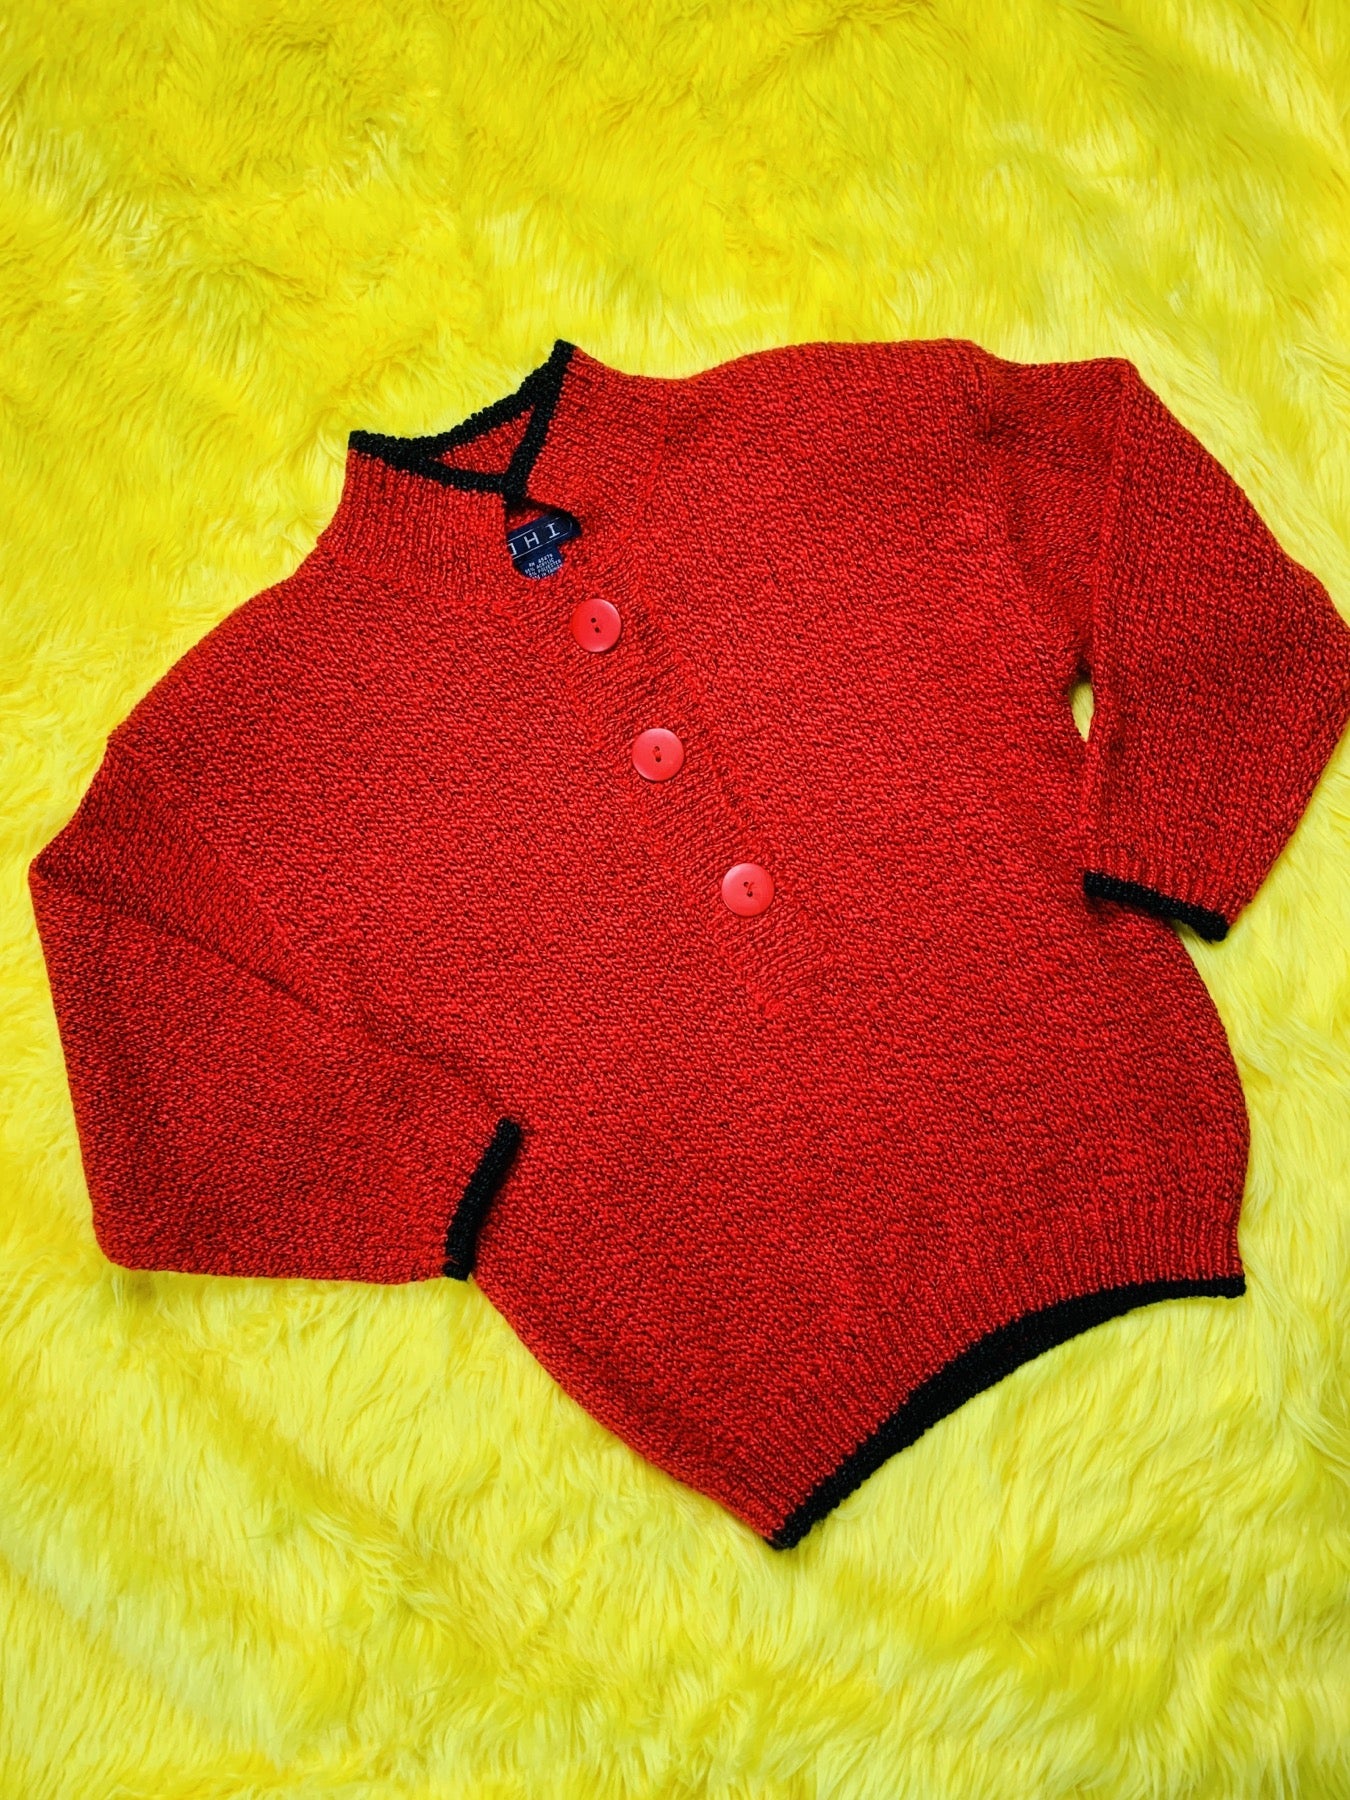 OHI RED KNIT SWEATER